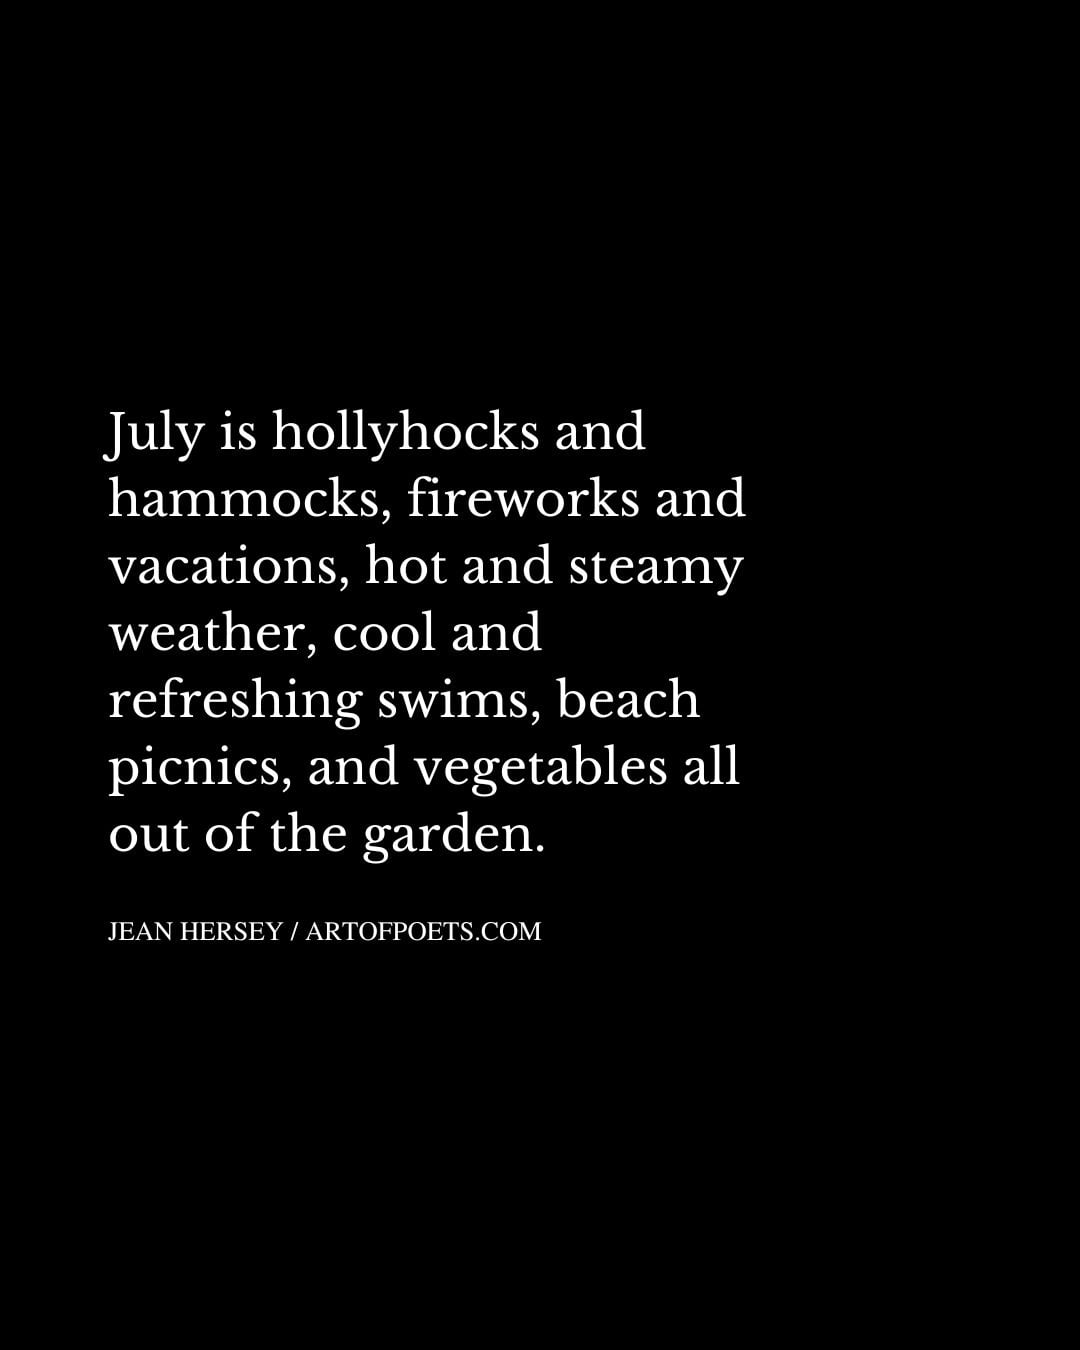 July is hollyhocks and hammocks fireworks and vacations hot and steamy weather cool and refreshing swims